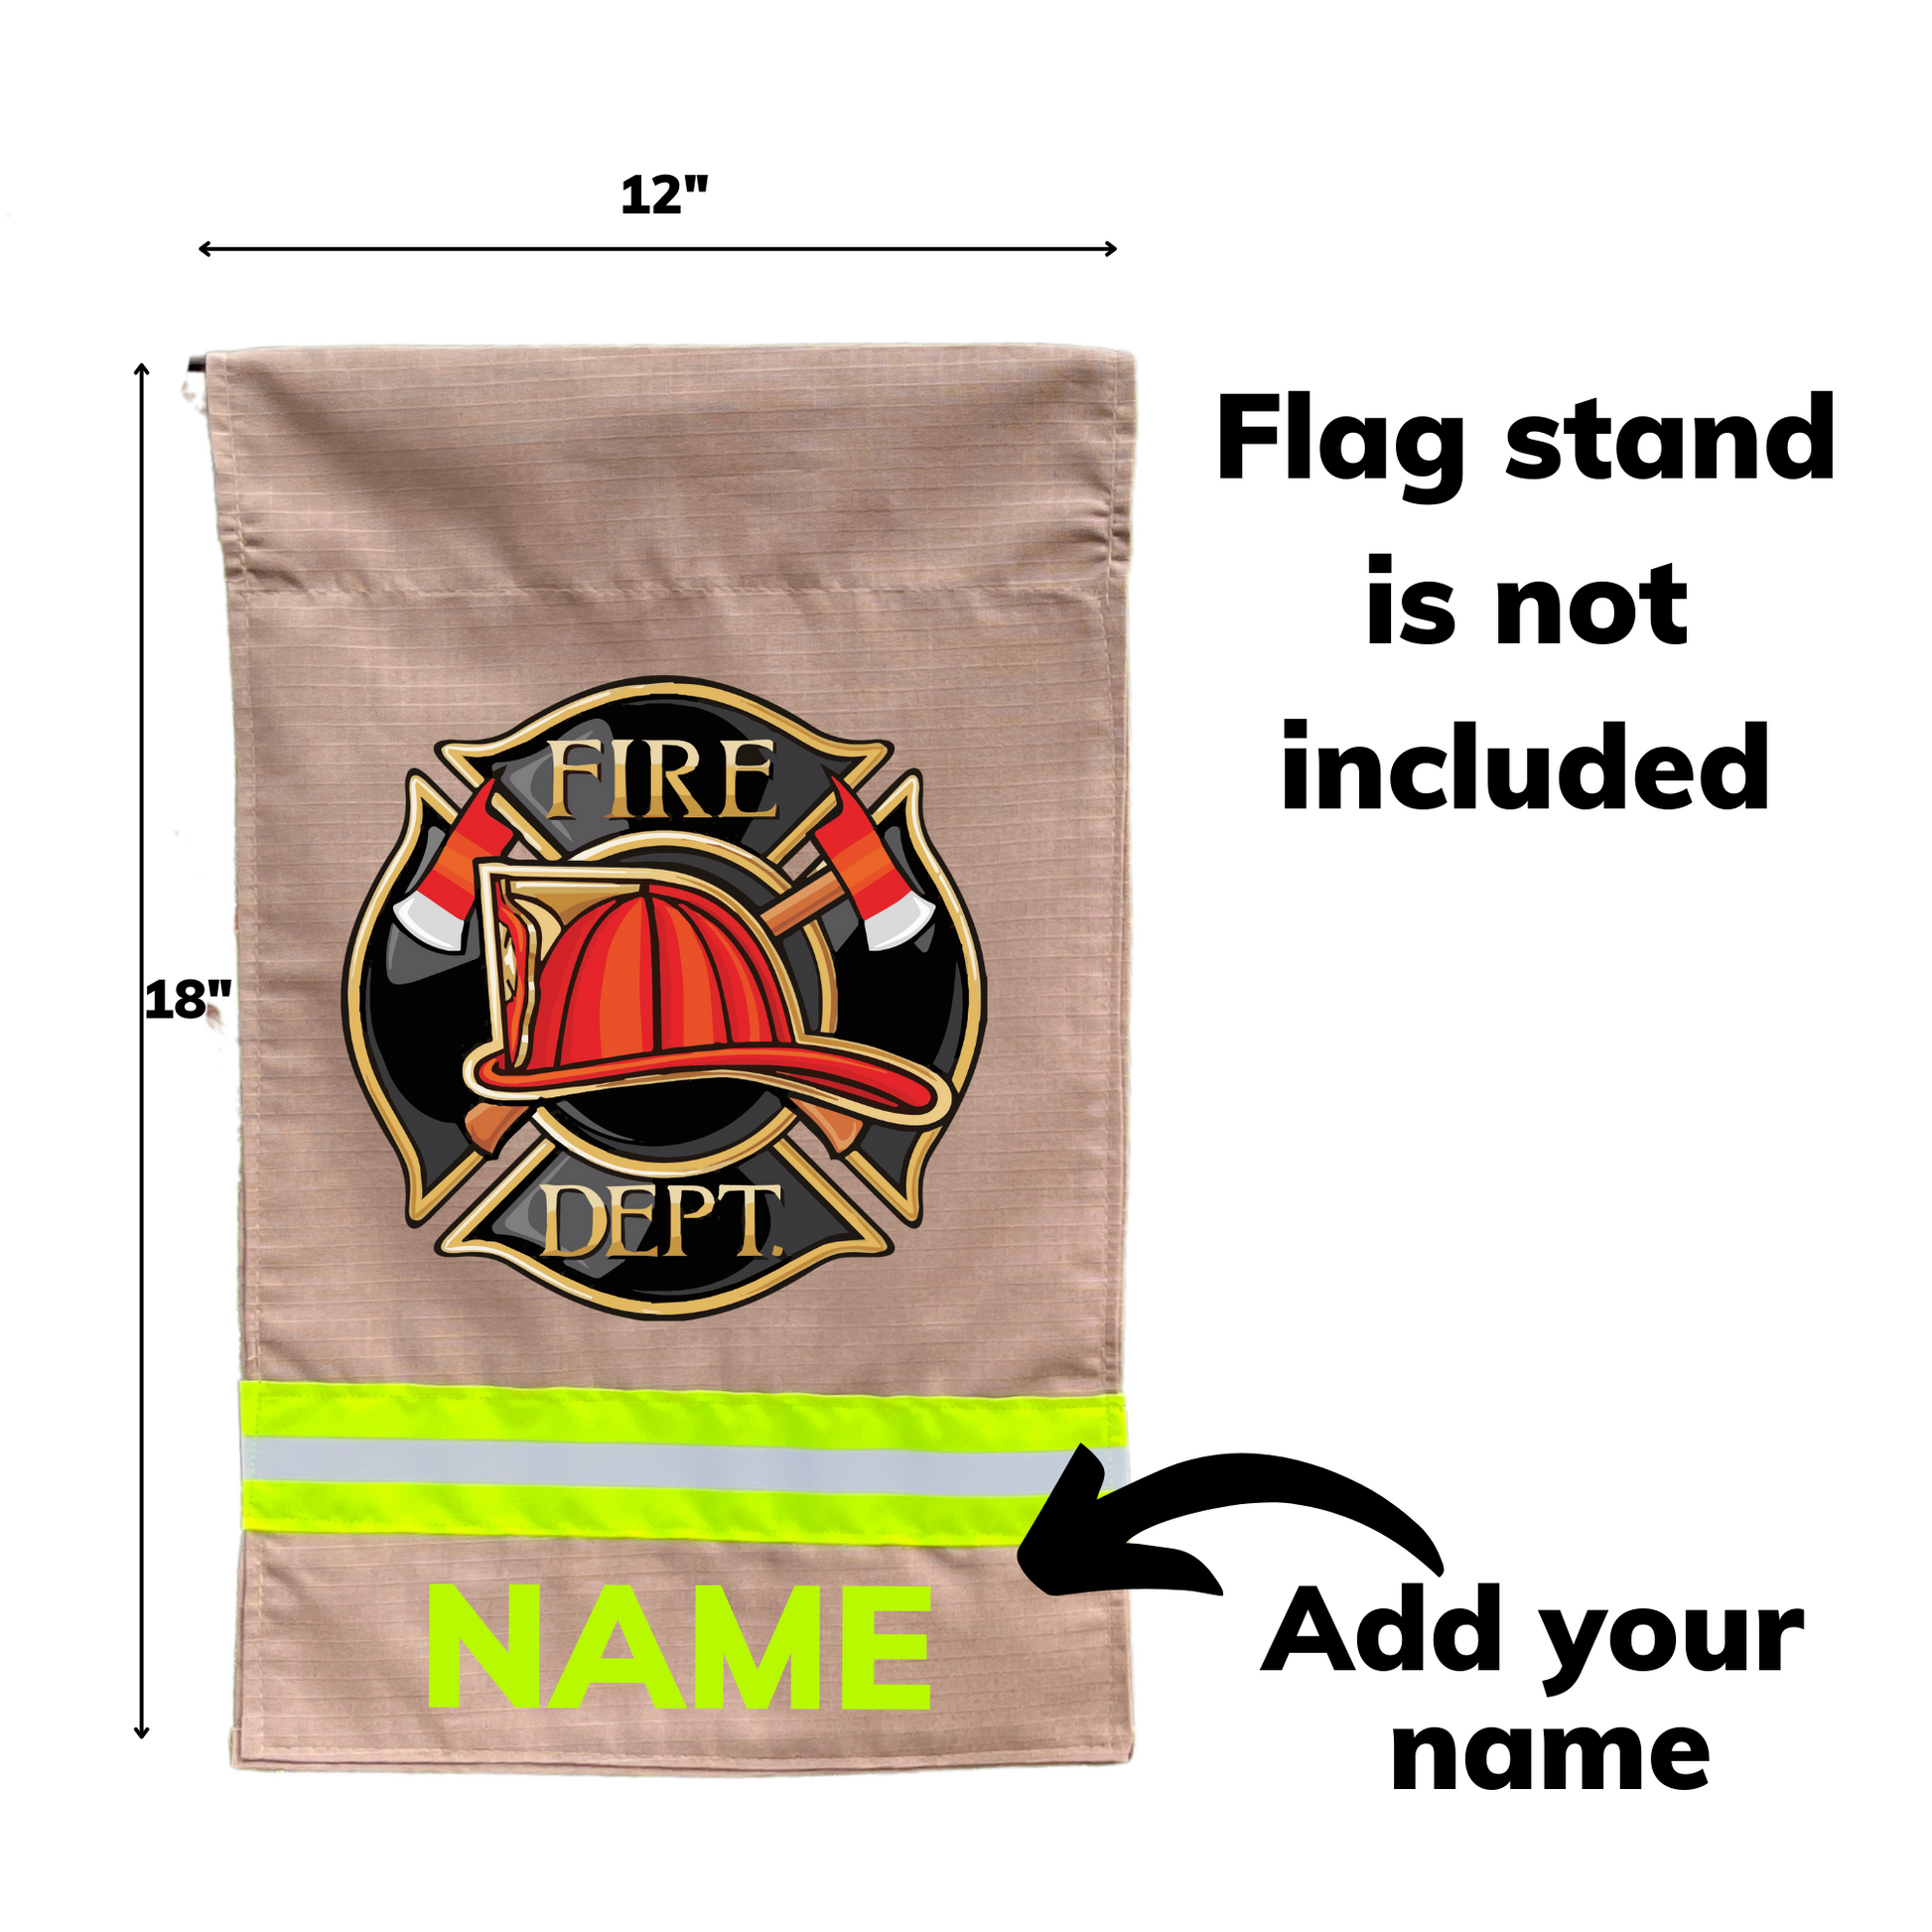 Flag size is 12 inches by 18 inches you can add your name to the bottom of the flag.  Flag stand not included.